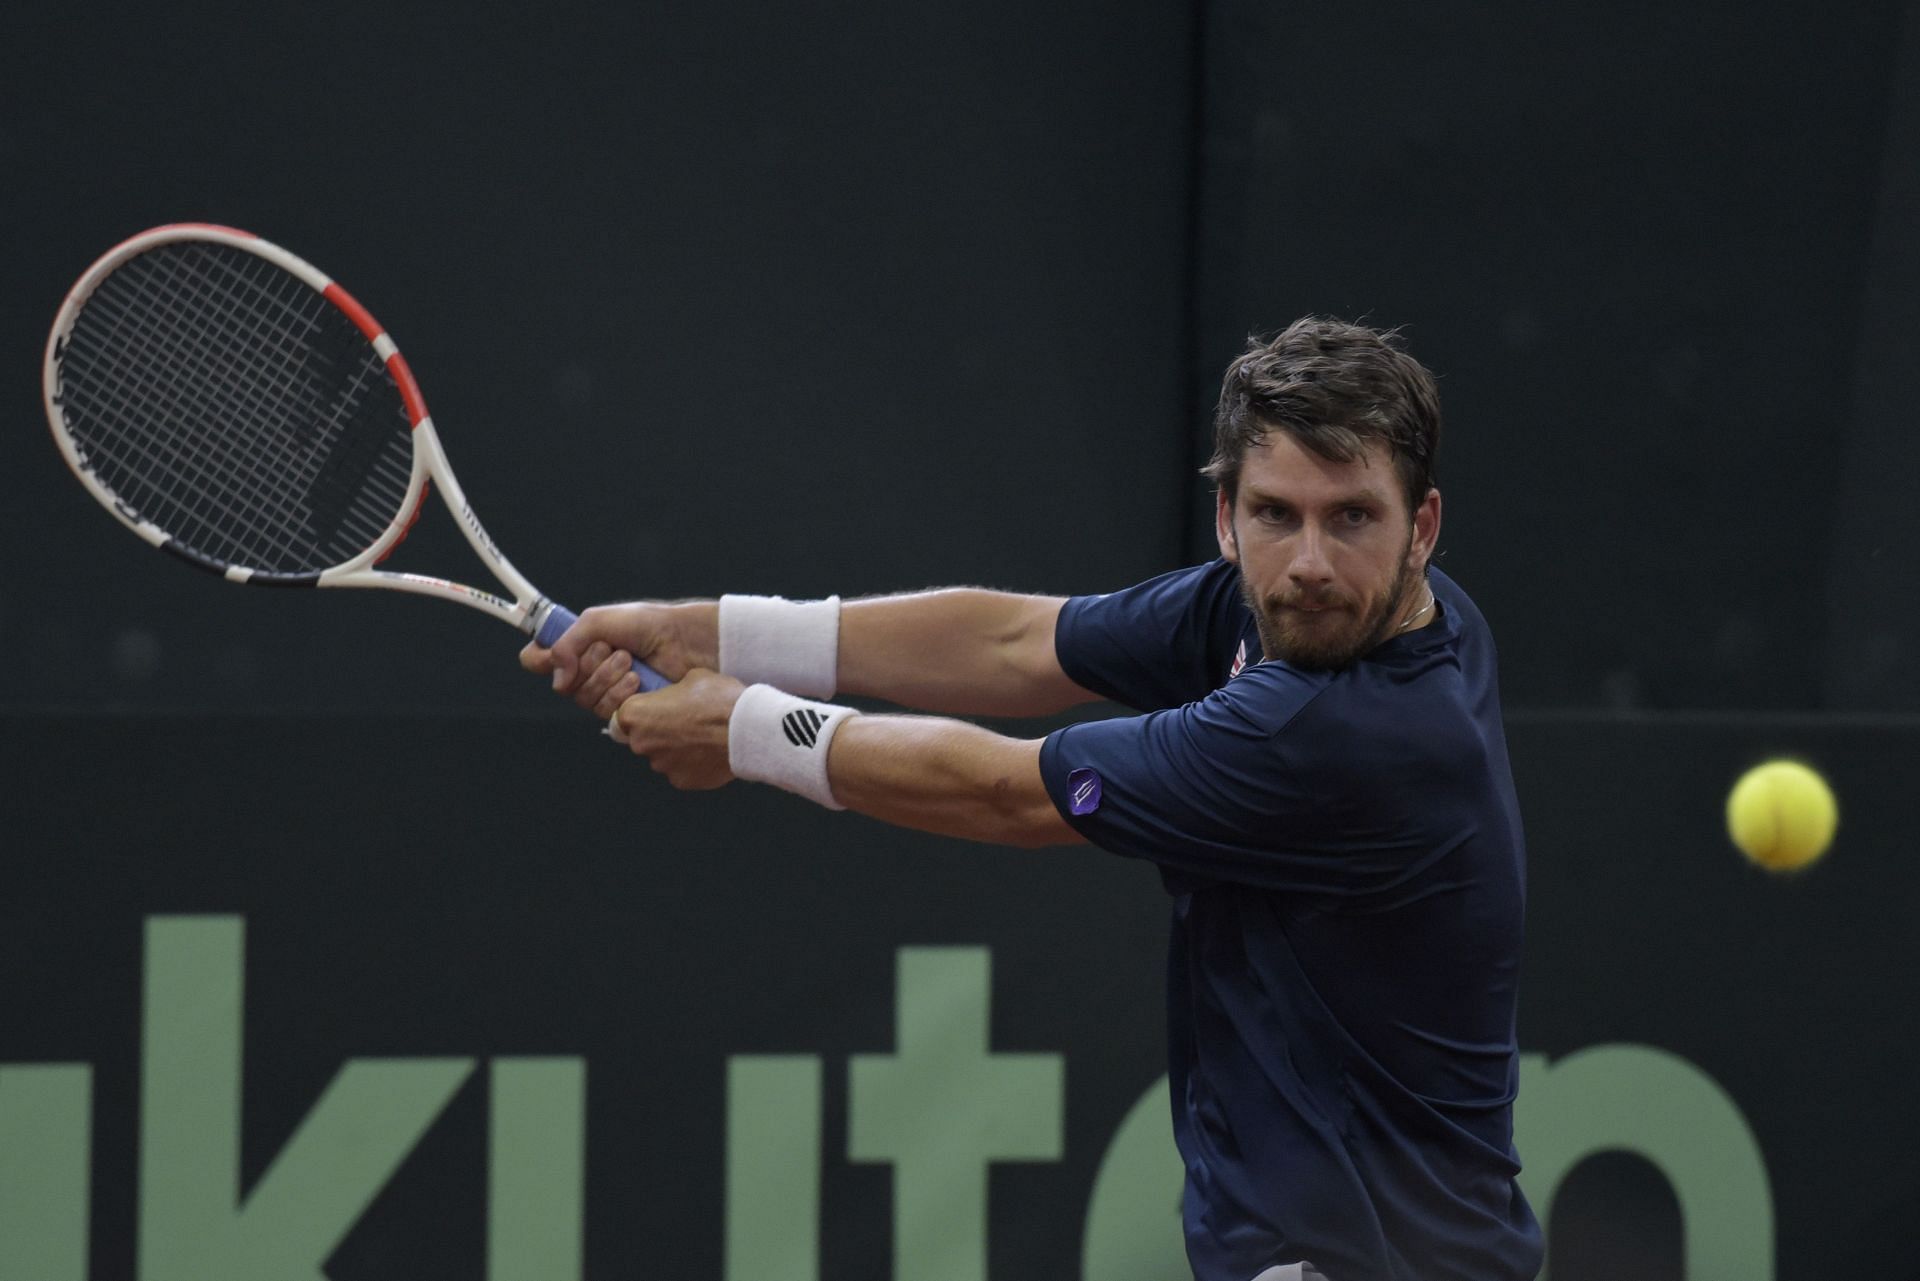 Cameron Norrie at the Davis Cup Qualifiers